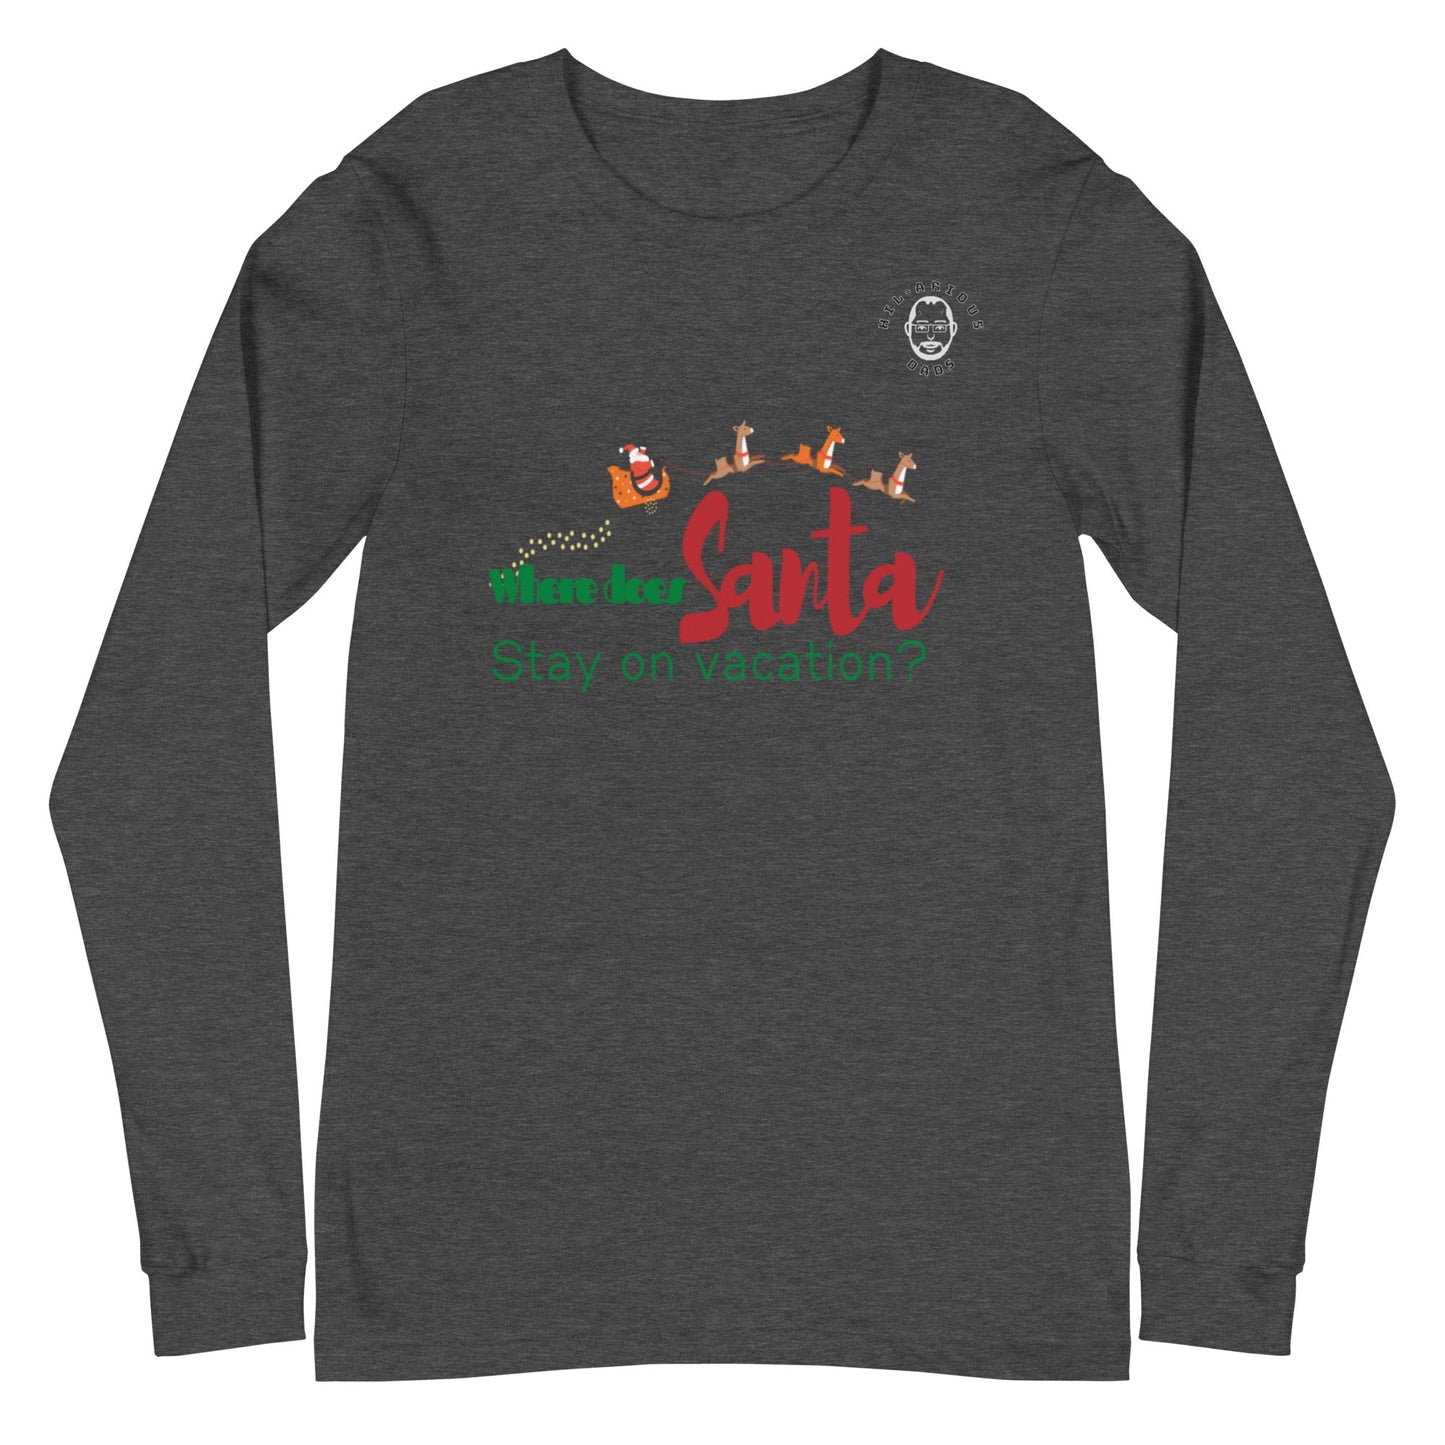 Where does Santa stay on vacation?-Long Sleeve Tee - Hil-arious Dads